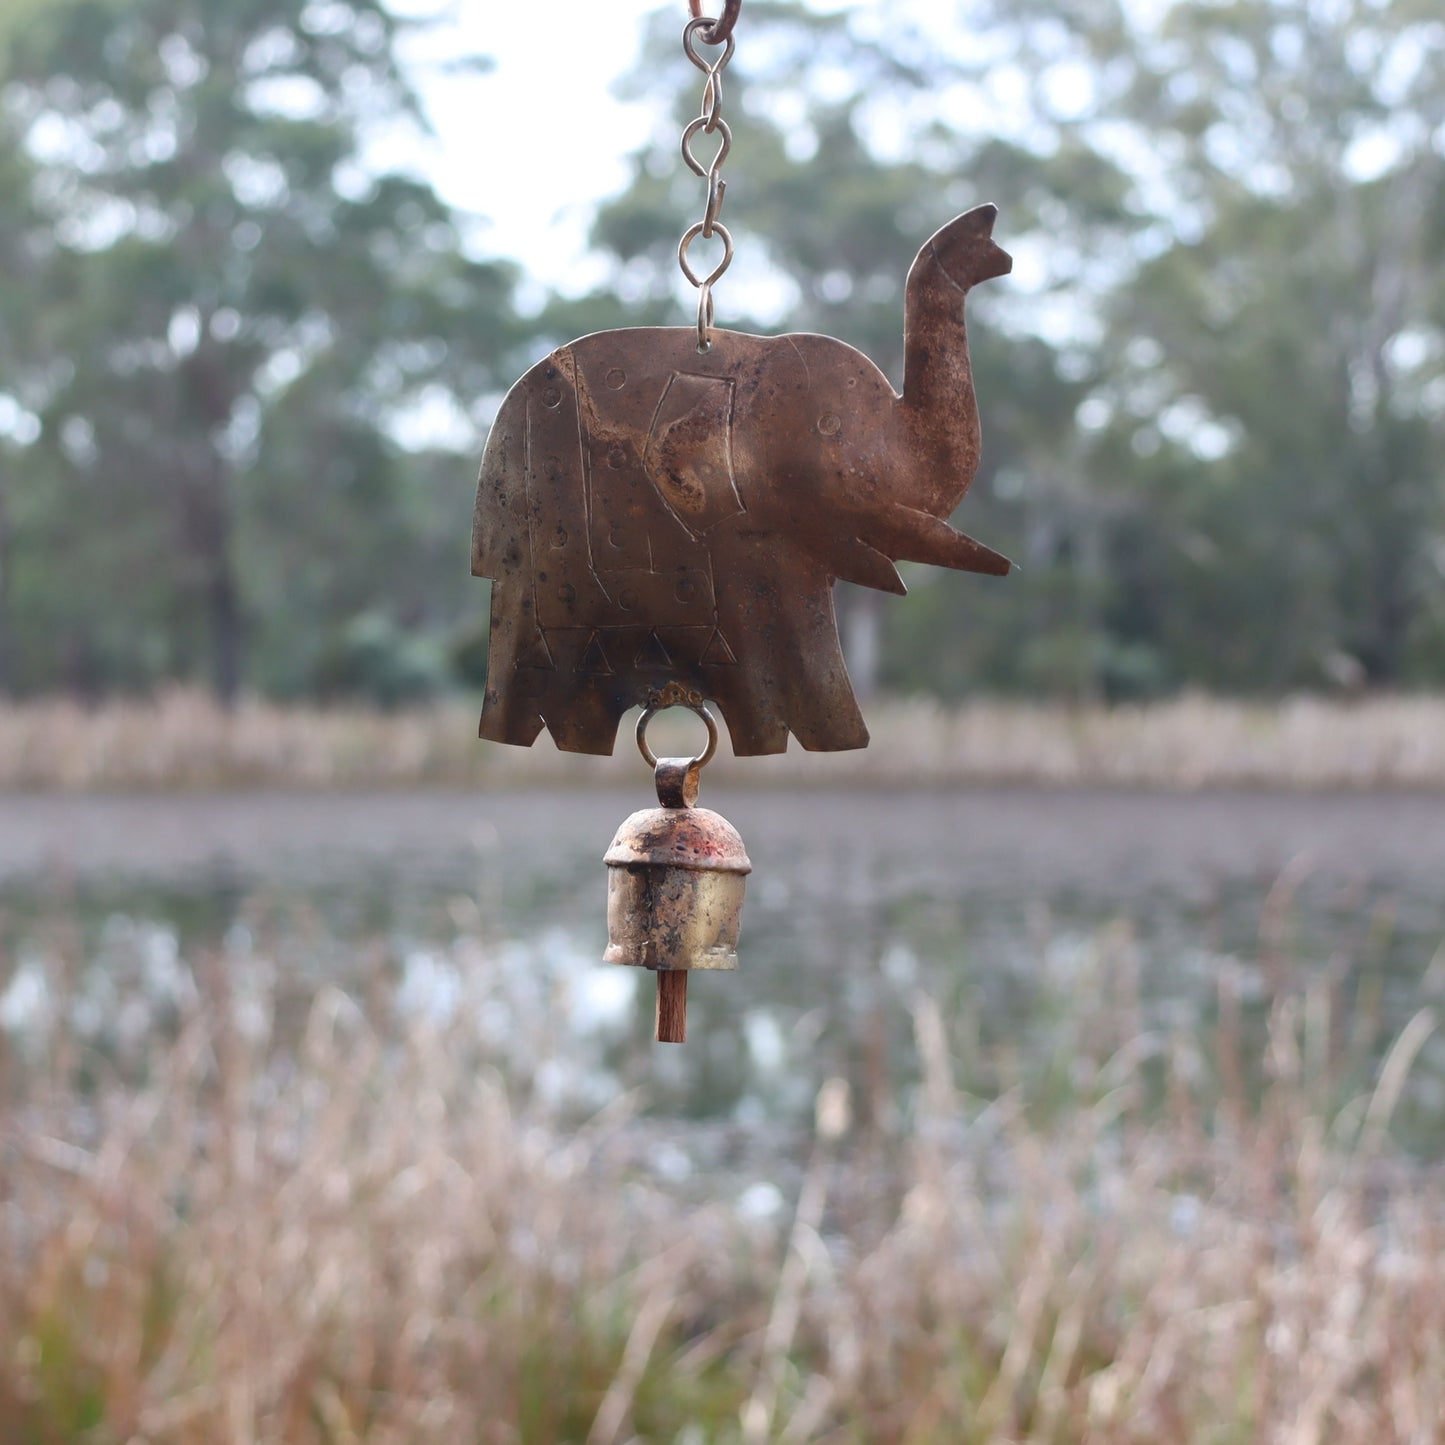 Elephant Decorative Chime with Bell, Rustic Hand-tuned Recycled Metal - Aksa Home Decor 